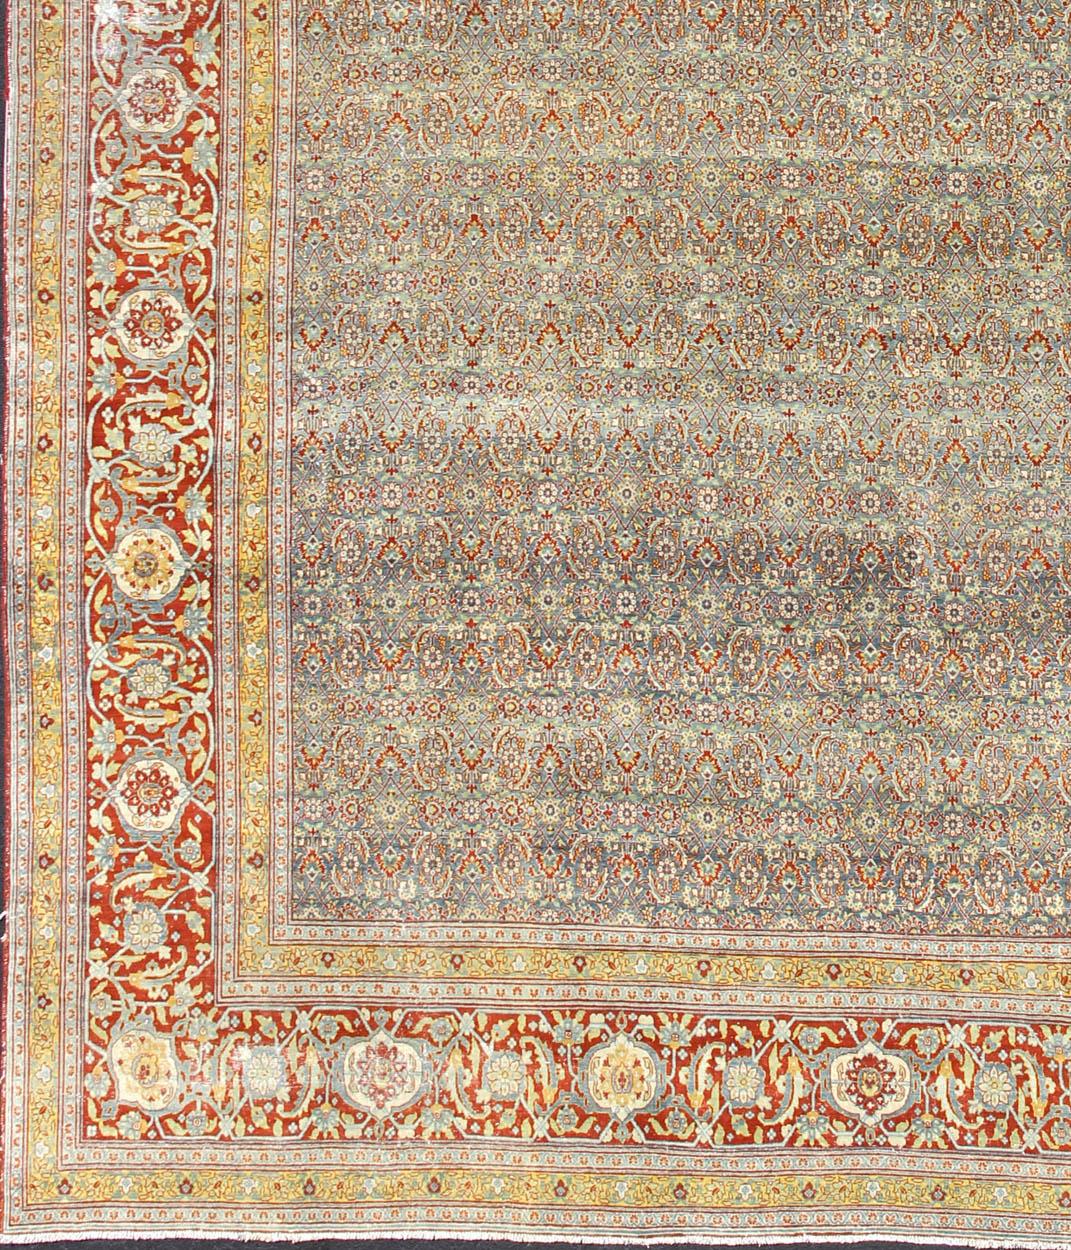 Red, border with gray, and blue Persian Tabriz antique rug in sub geometric design. keivan Woven Arts / rug zir-1, country of origin / type: Iran / Tabriz, circa 1910.
Measures: 13'6 x 16'2.
This antique Persian Tabriz carpet (circa early 20th